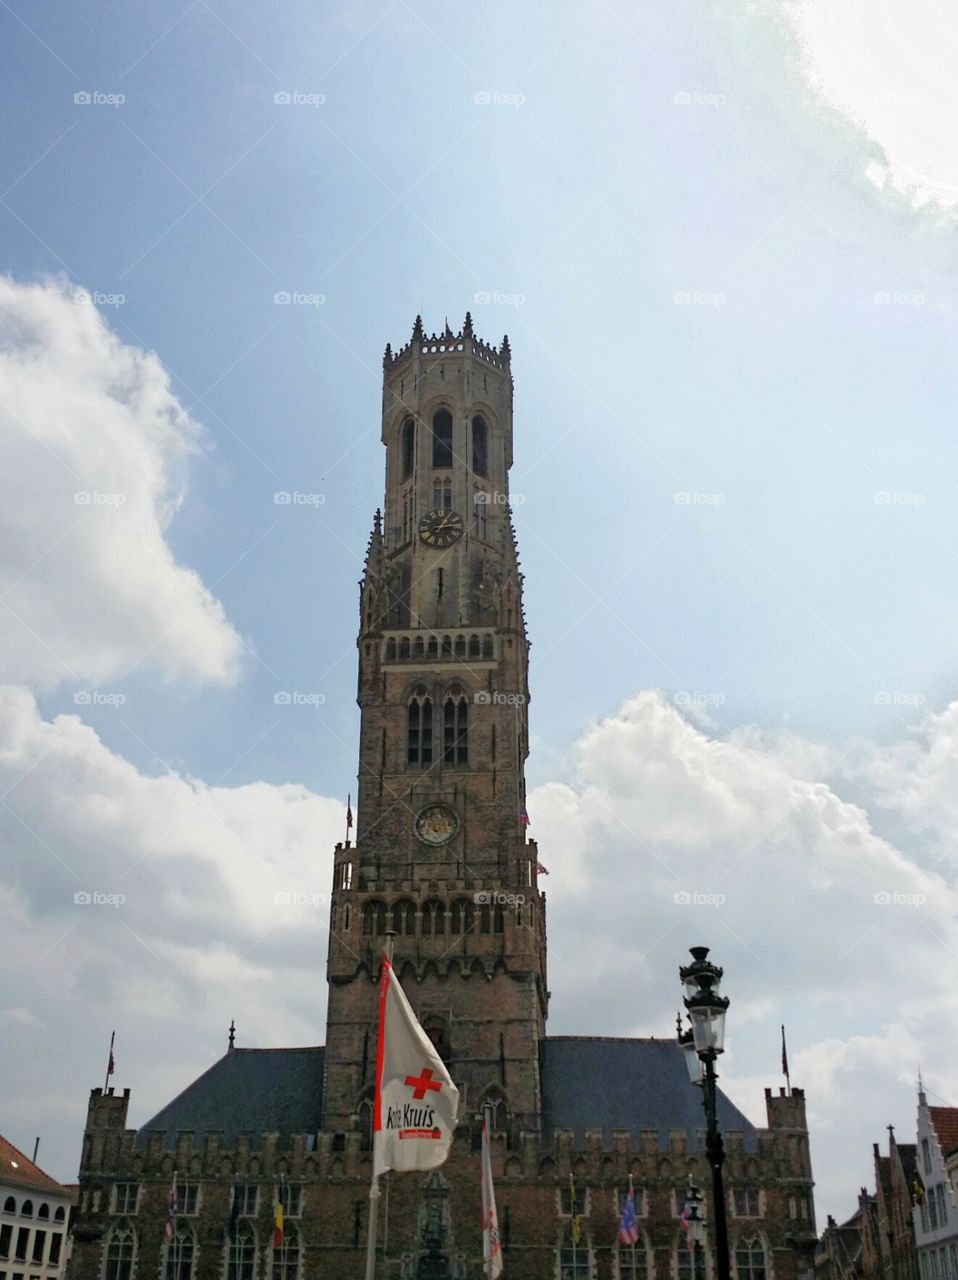 The belfry of Bruges is a medieval bell tower in the historical centre of Bruges, Belgium. One of the city's most prominent symbols, the belfry formerly housed a treasury and the municipal archives, and served as an observation post for spotting fires and other danger.